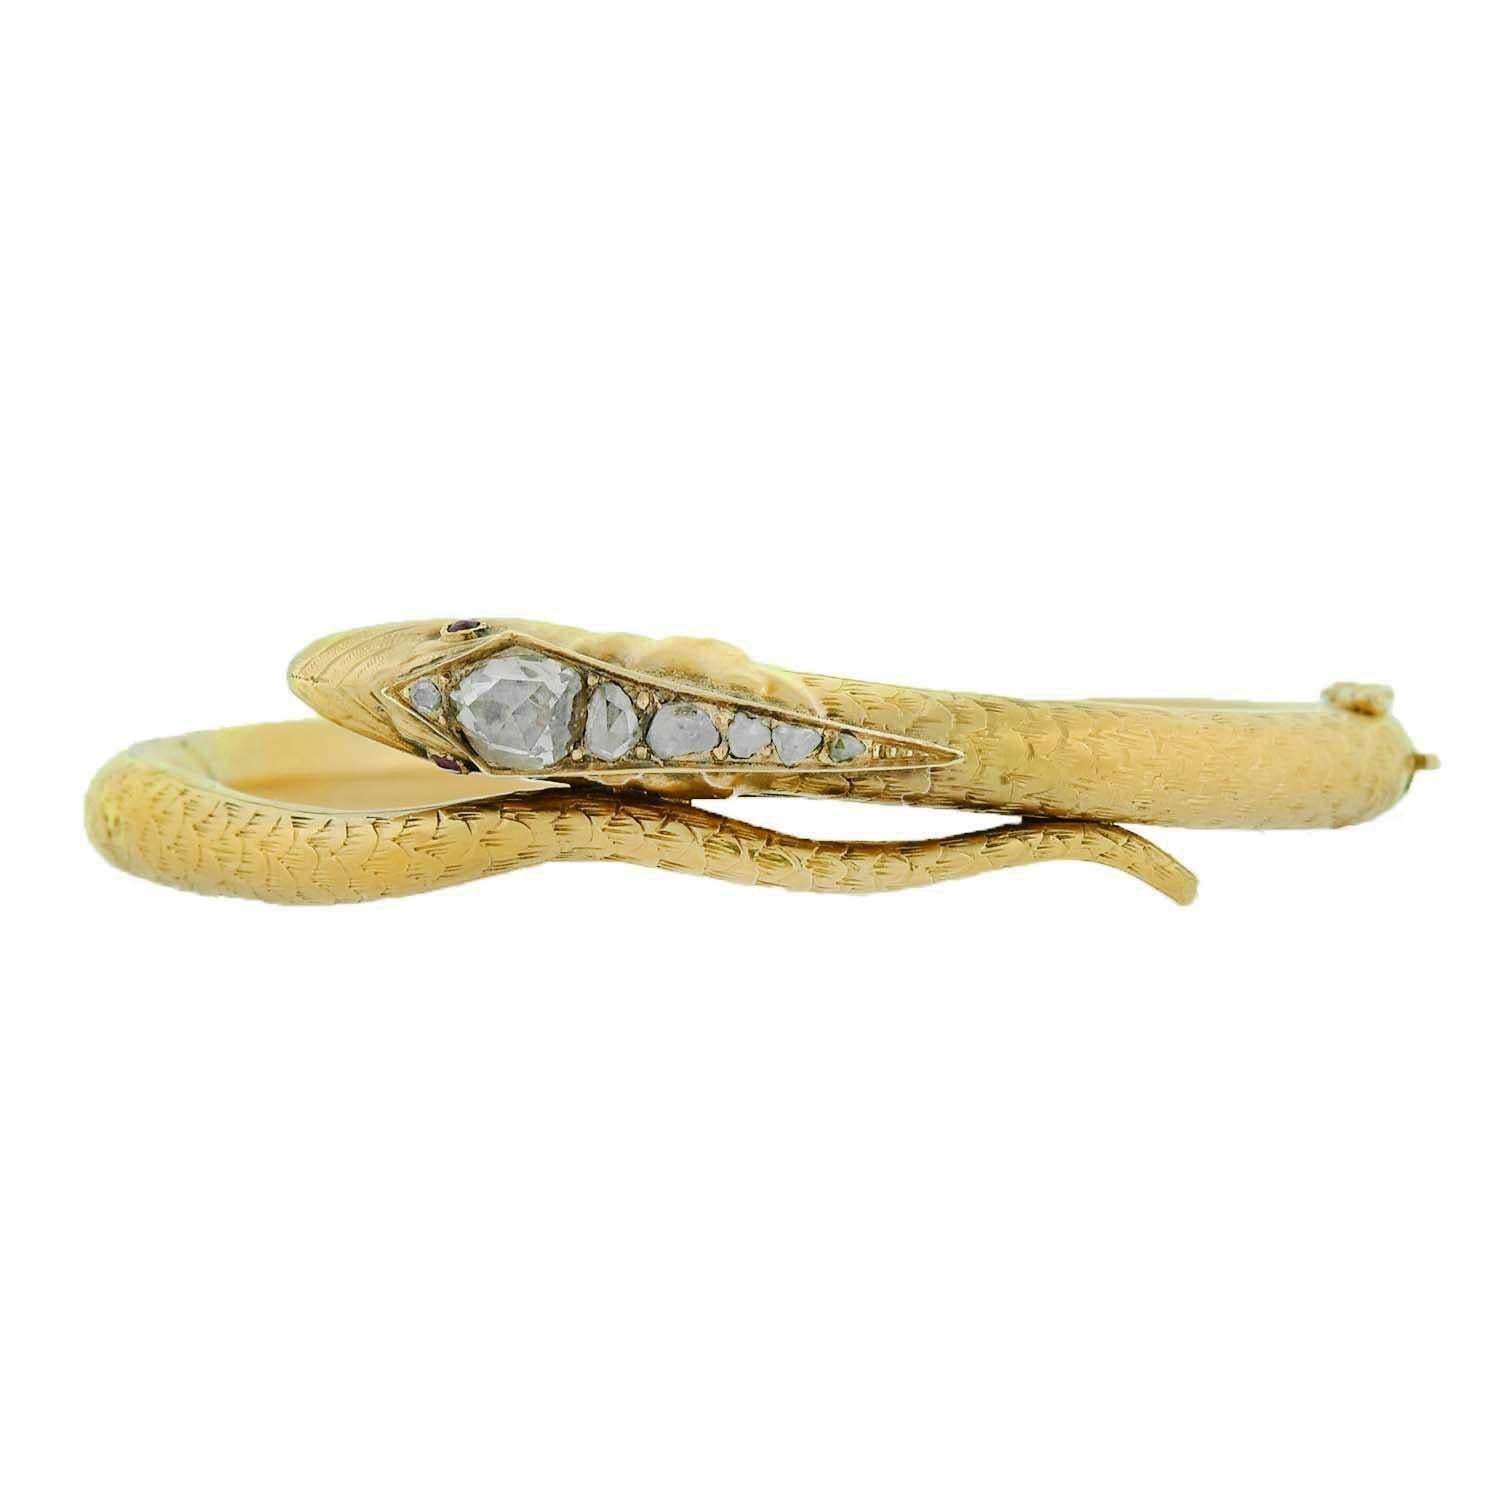 An absolutely stunning and unique diamond snake bracelet from the Early Victorian (ca1814-1865) era! Crafted in 18kt yellow gold, this fantastic bangle portrays a snake whose body curls around the wrist, with its head and tail overlapping at the